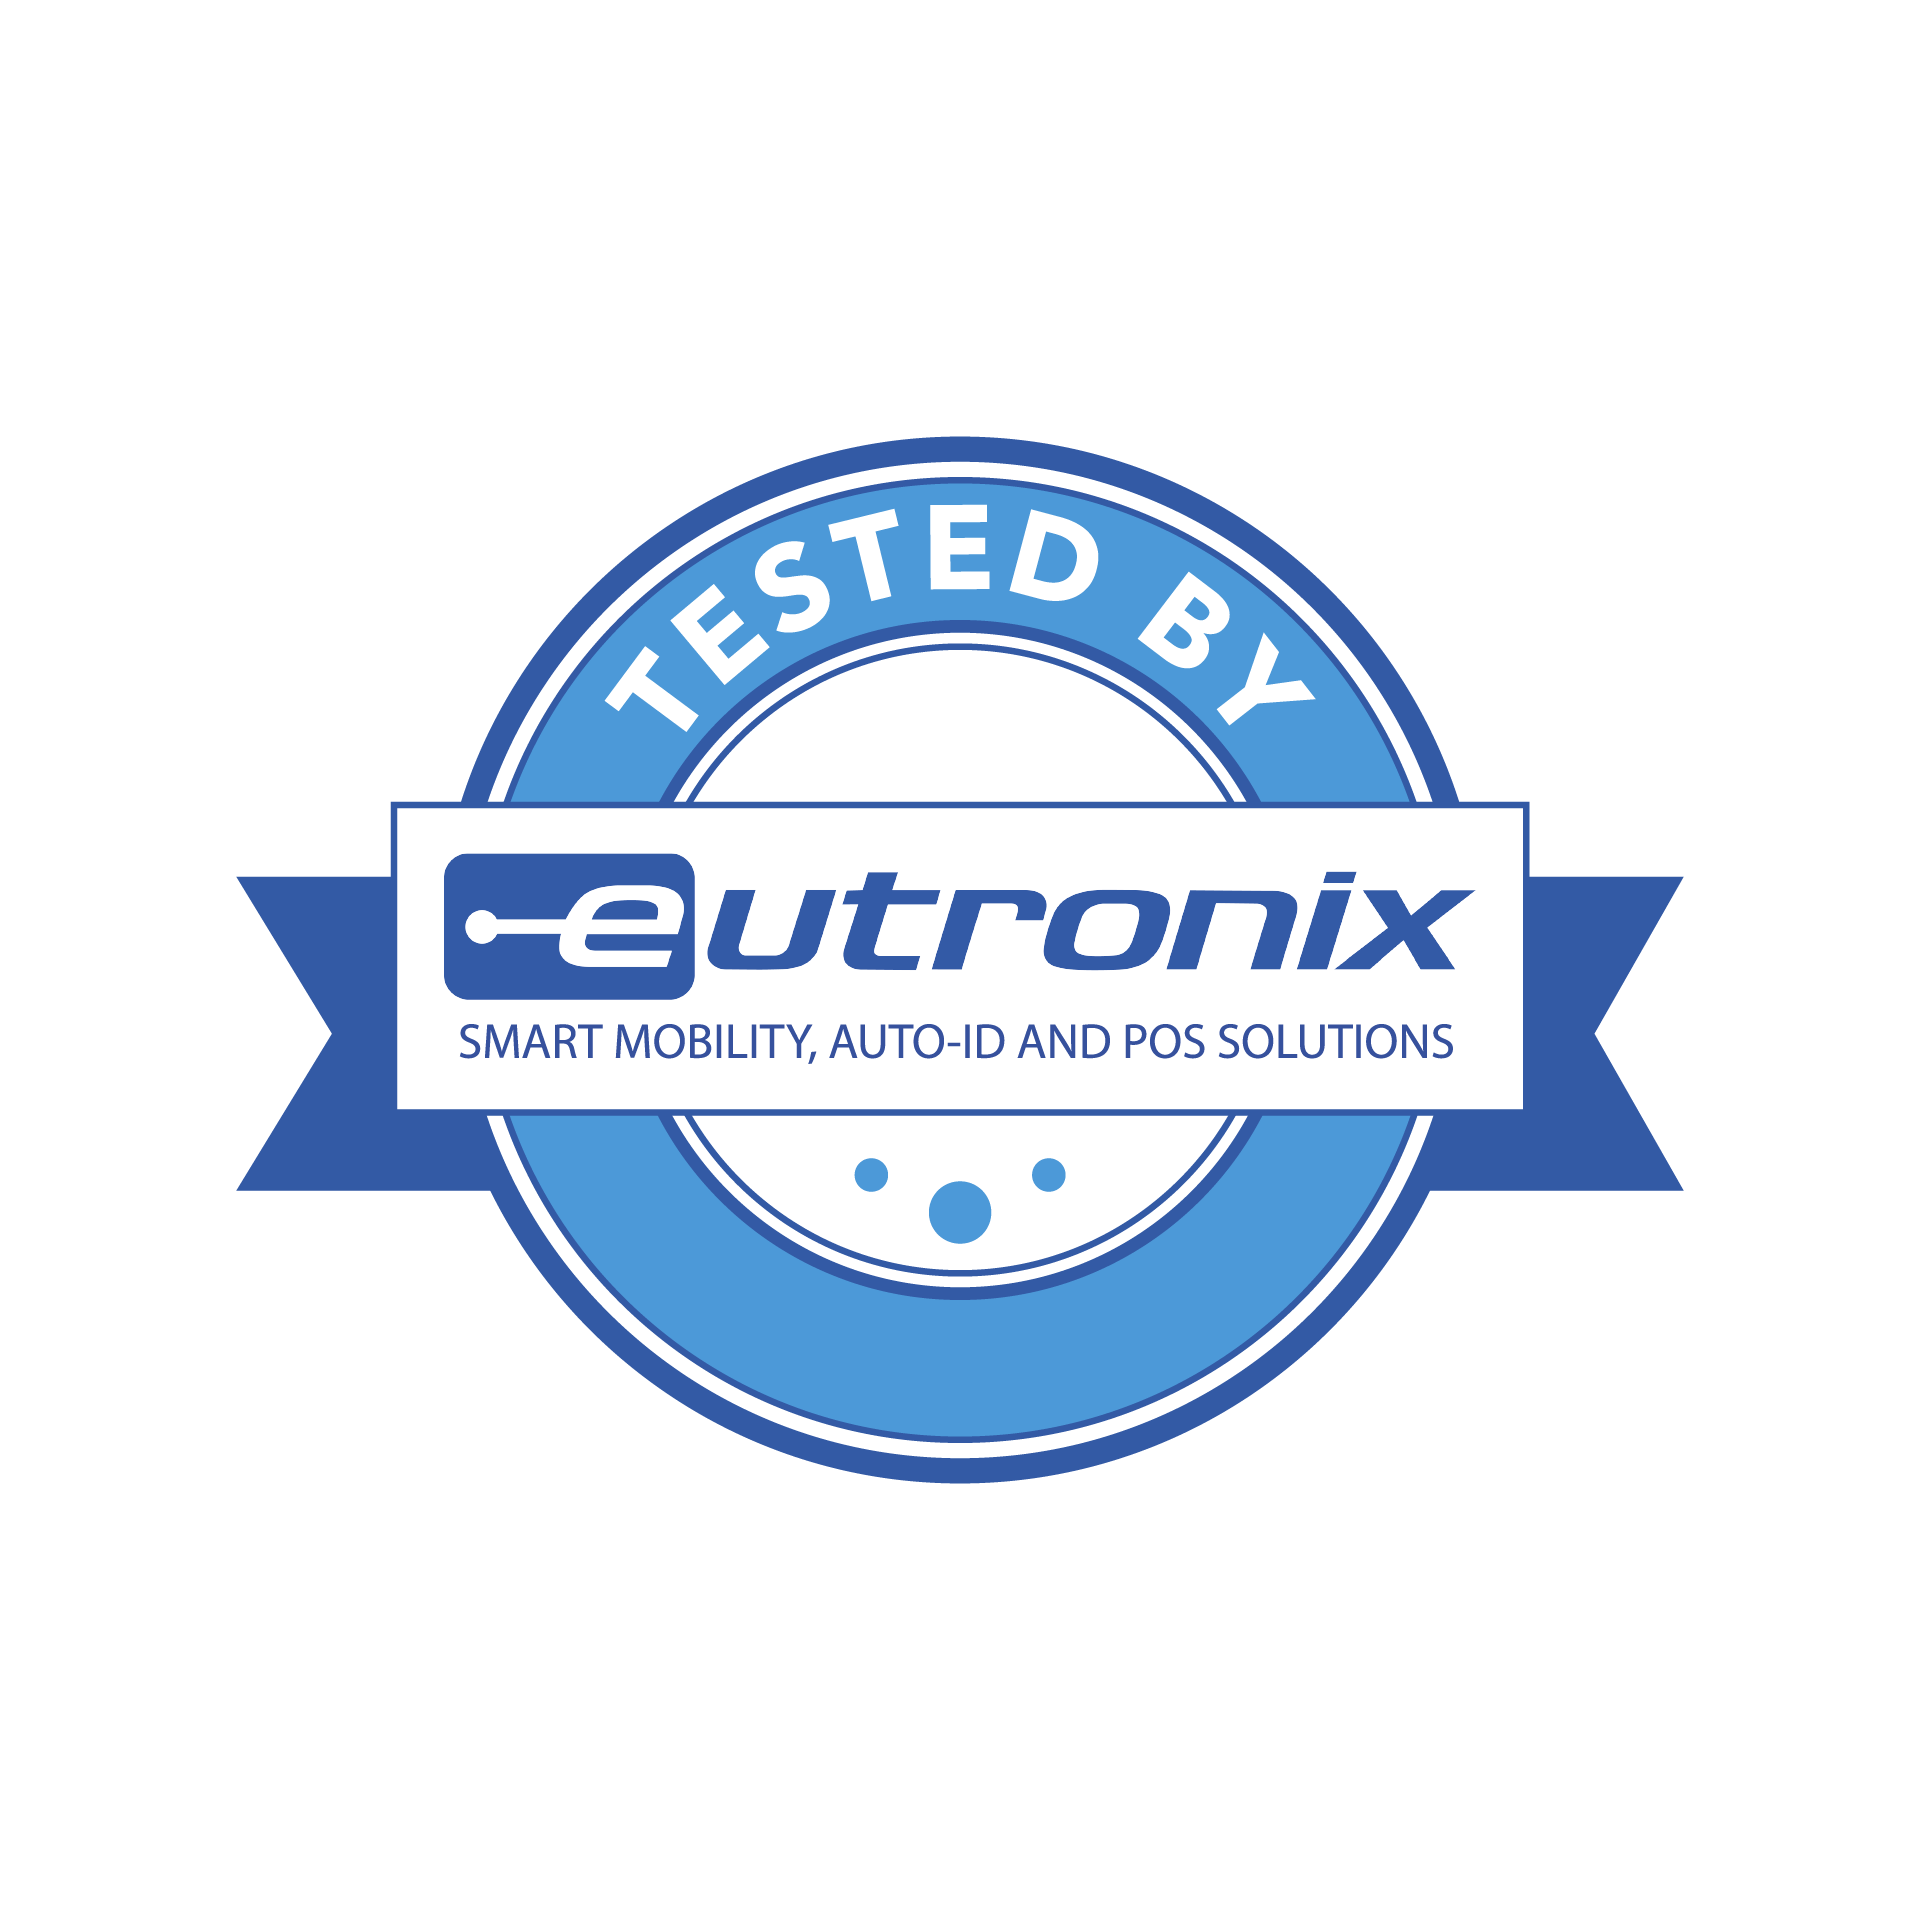 tested by Eutronix